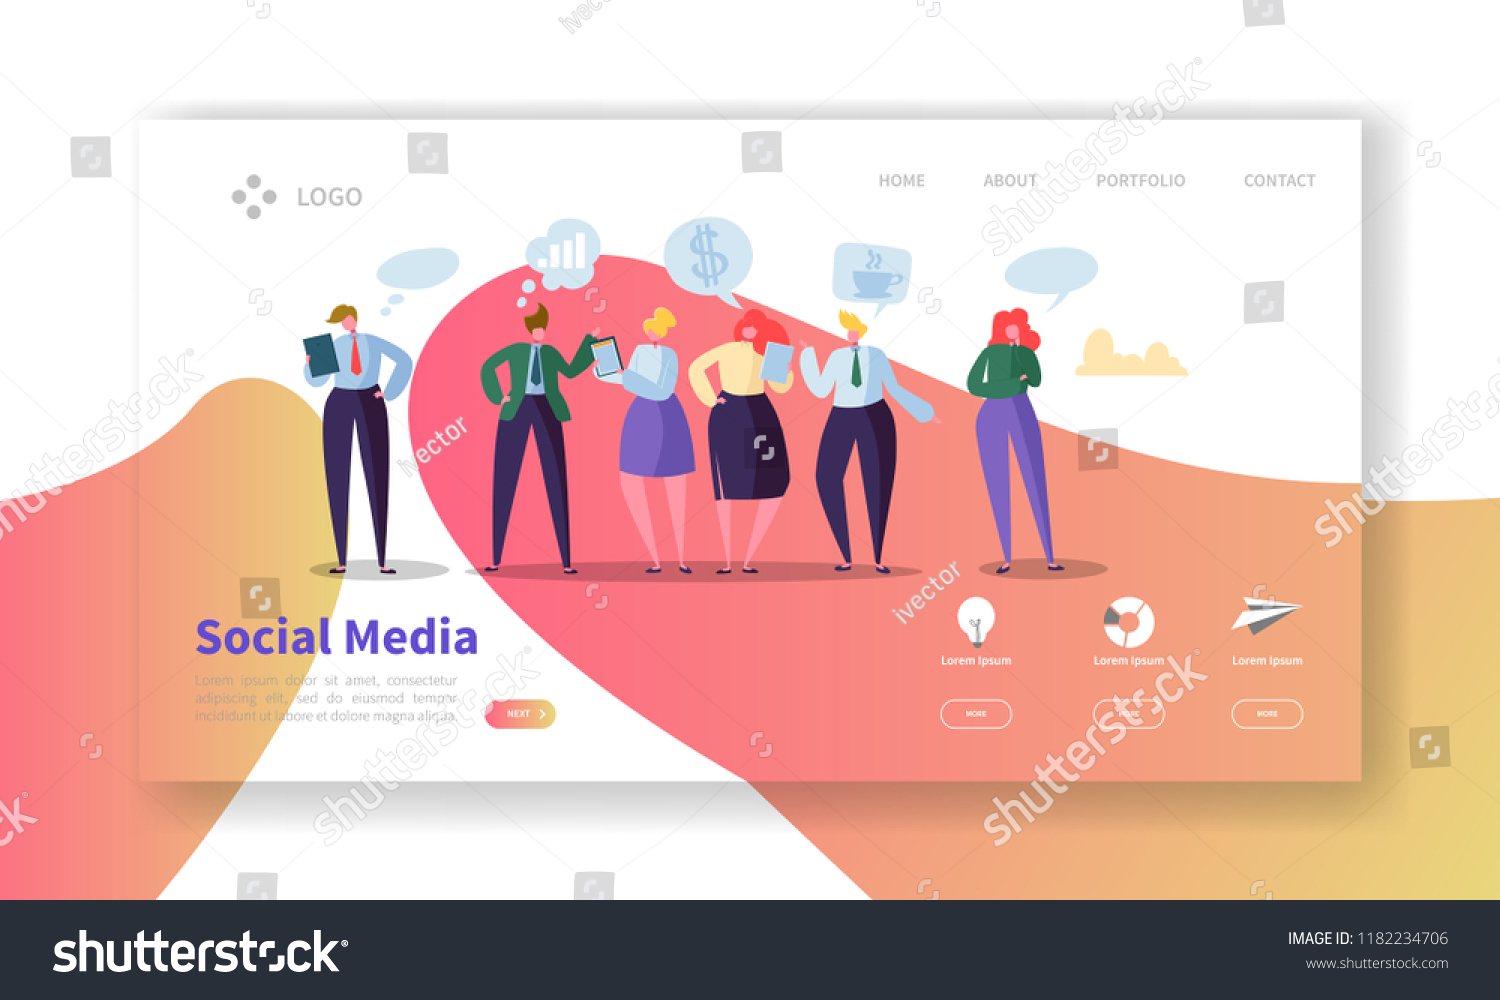 Social Media Page Template from image.shutterstock.com